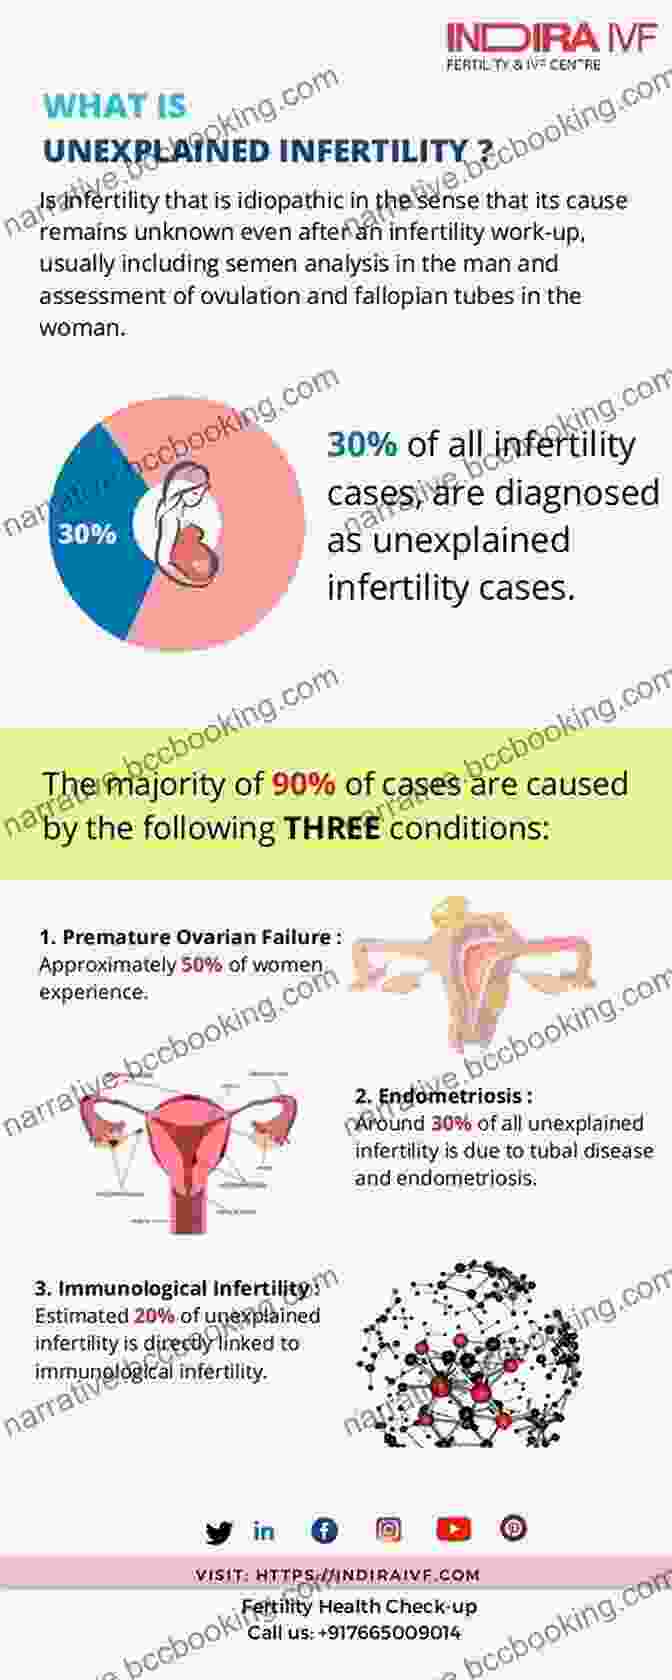 Unexplained Infertility Beyond Infertility: 48 Reasons Why You Are Not Yet Pregnant